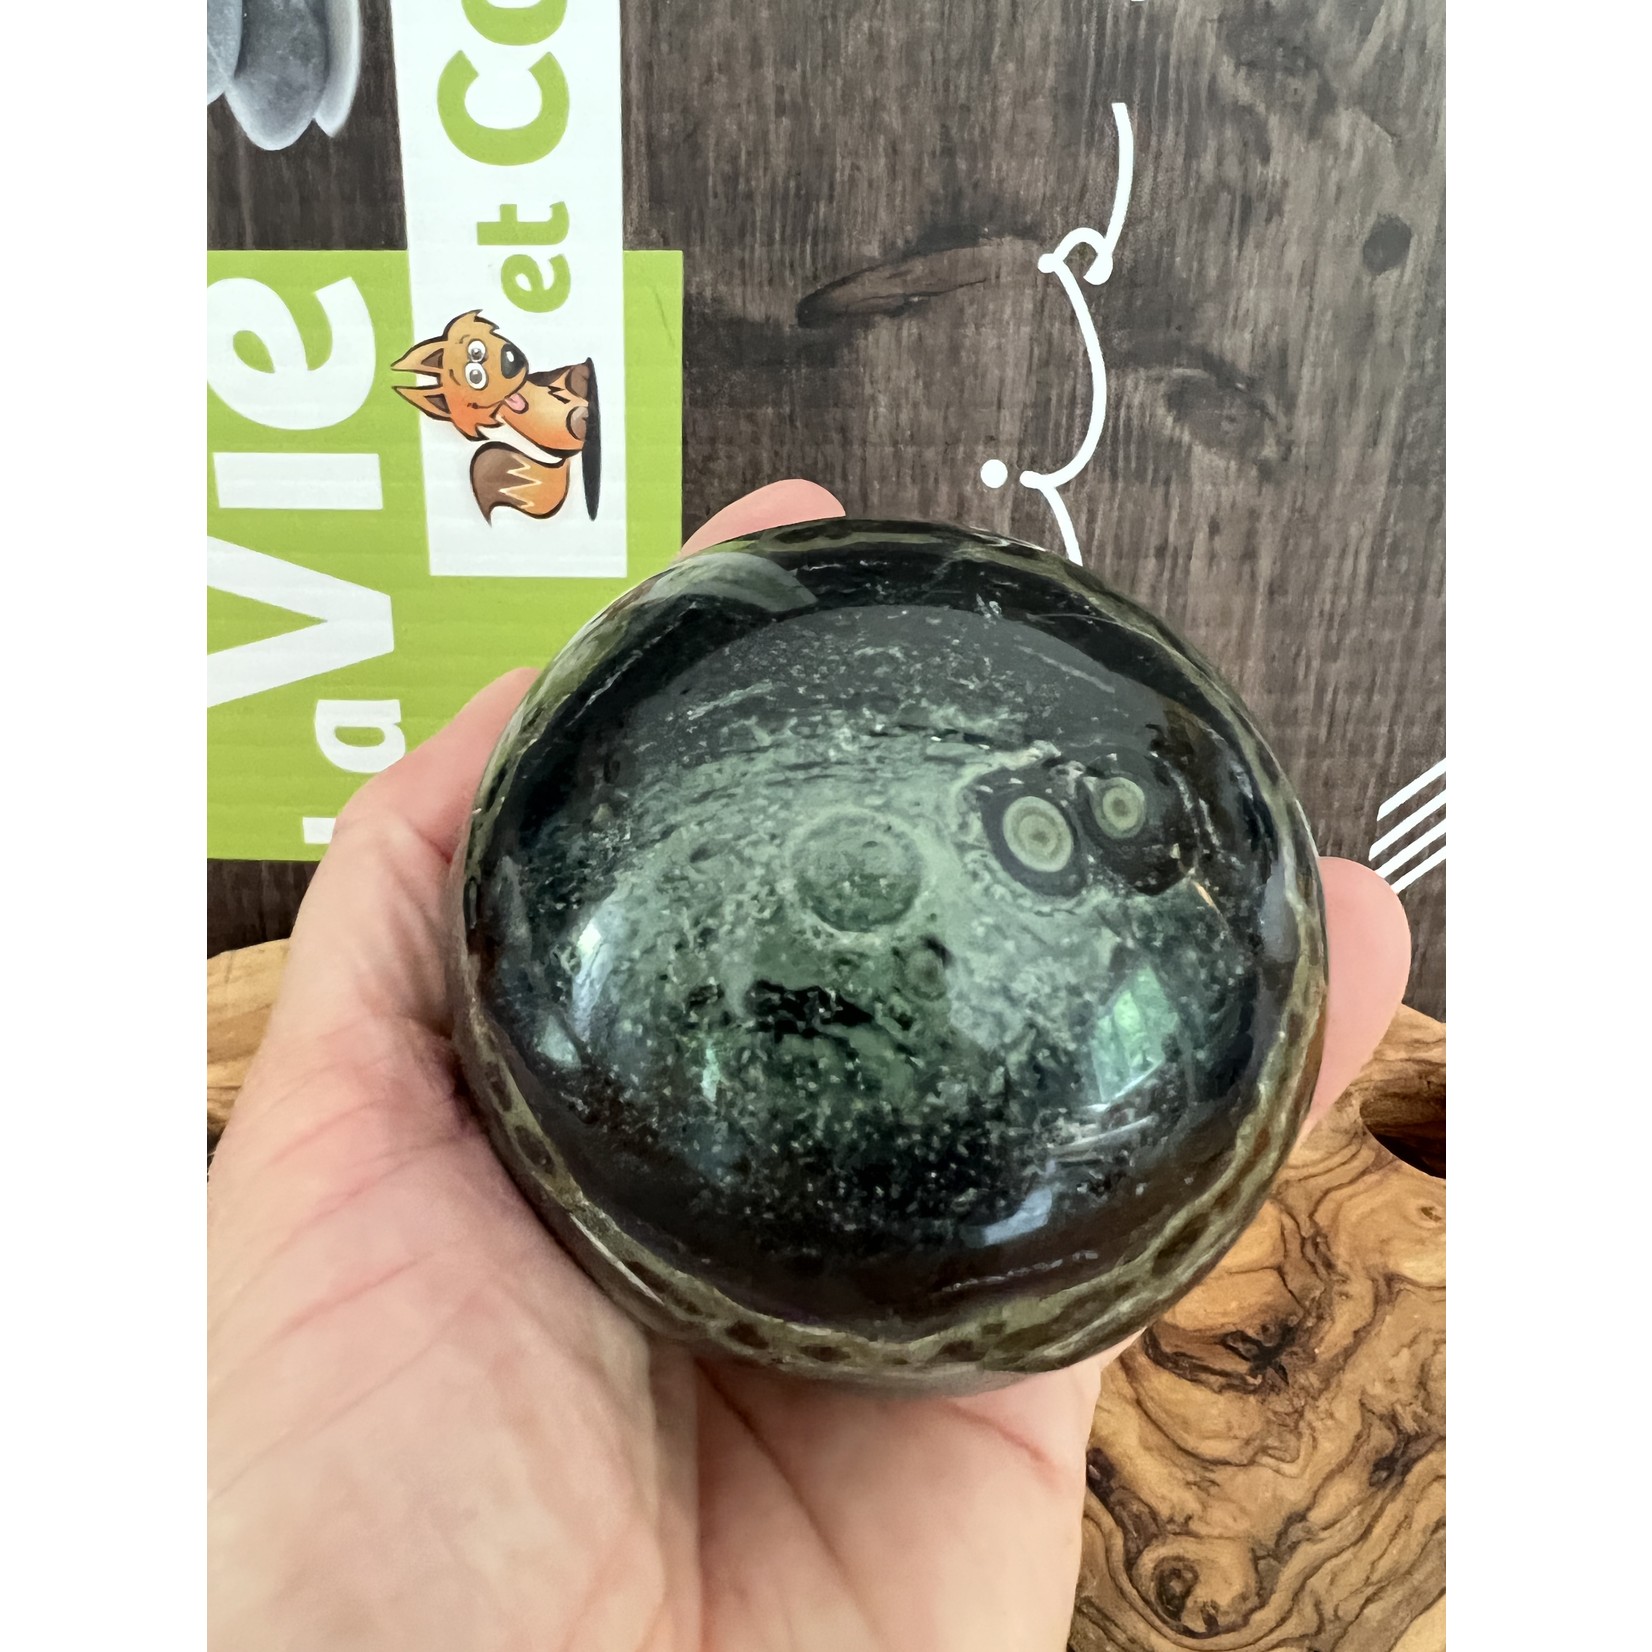 impressive kambaba jasper sphere XL, helps to enjoy the present moment without dwelling on the past or being anxious about the future